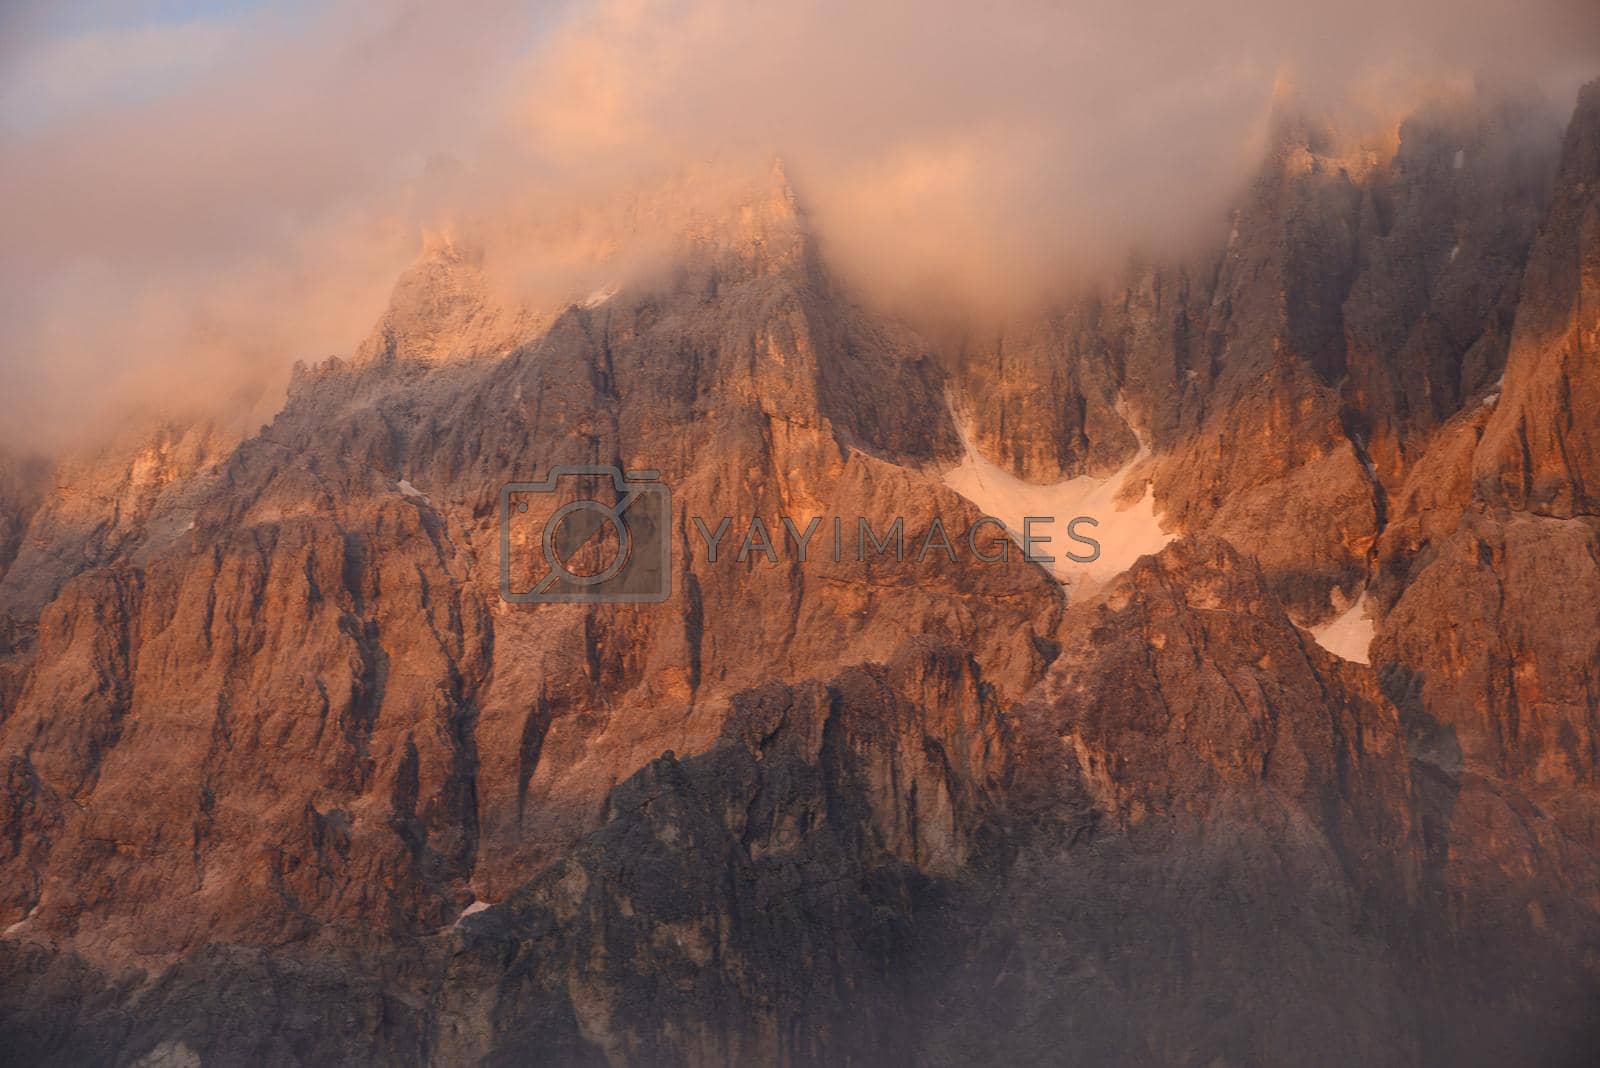 Royalty free image of Dolomite mountain in Italy by porbital